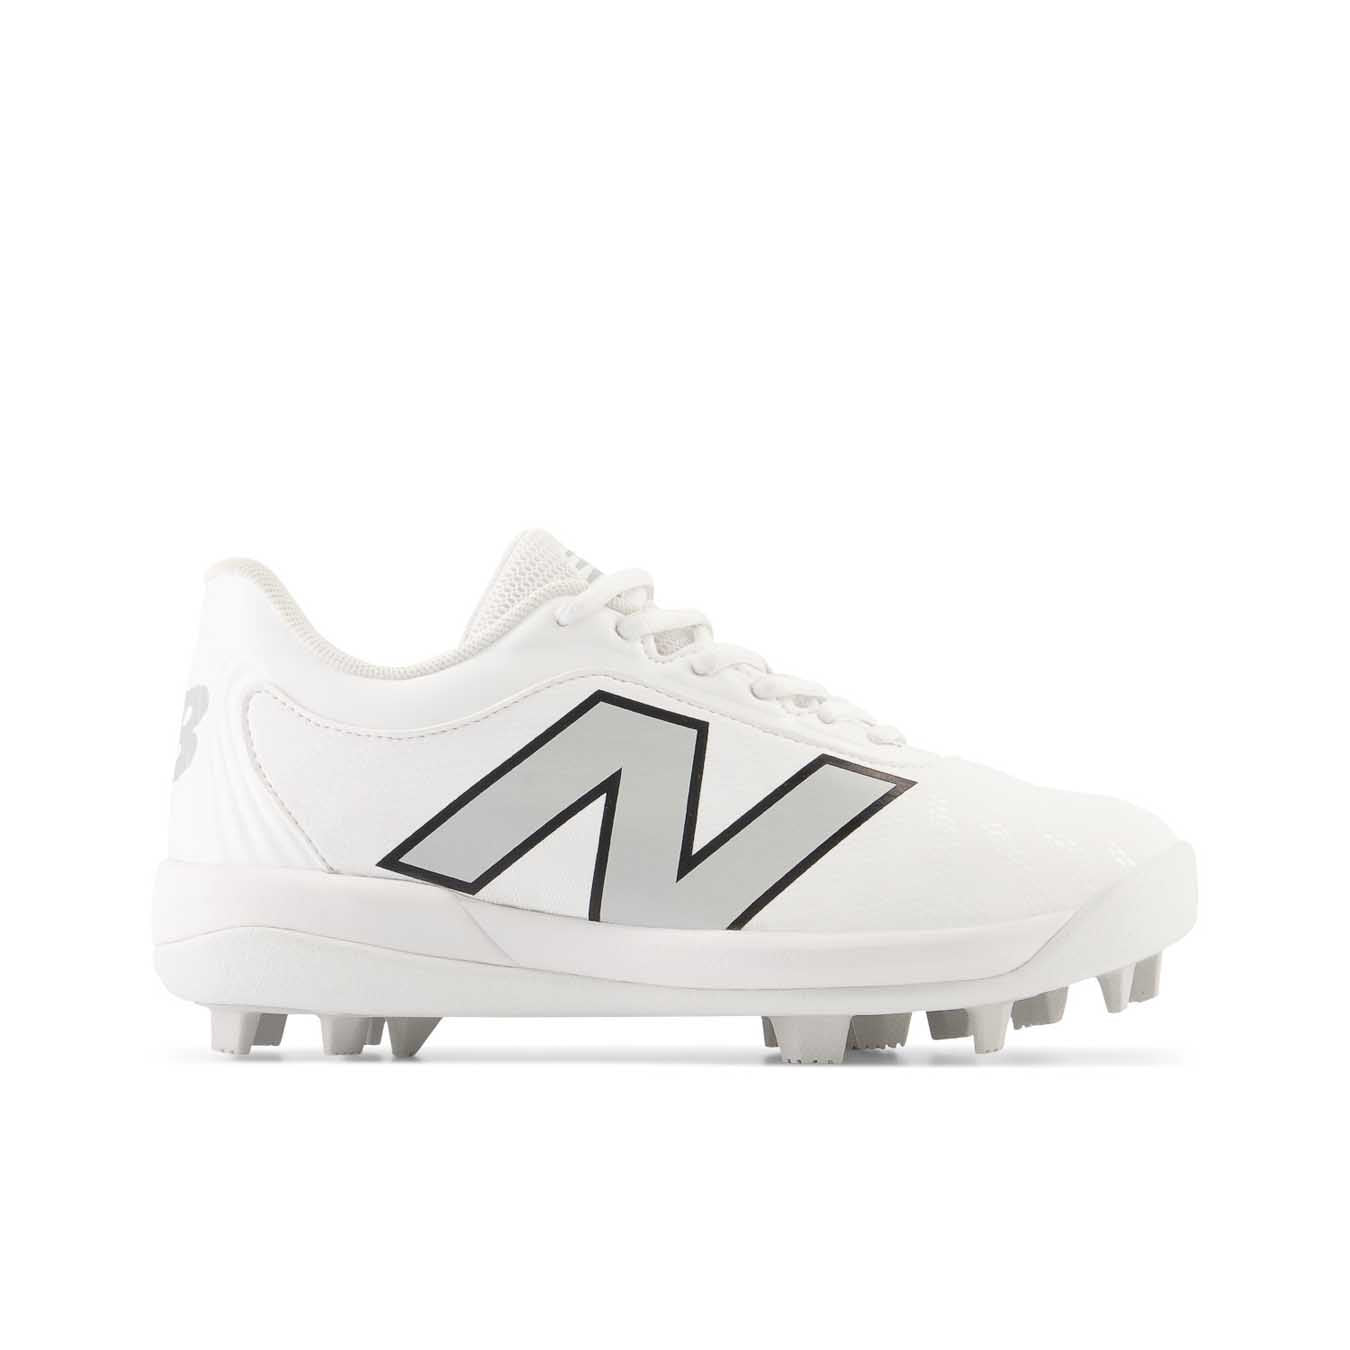 New Balance J4040v7 Youth Molded Rubber Cleats